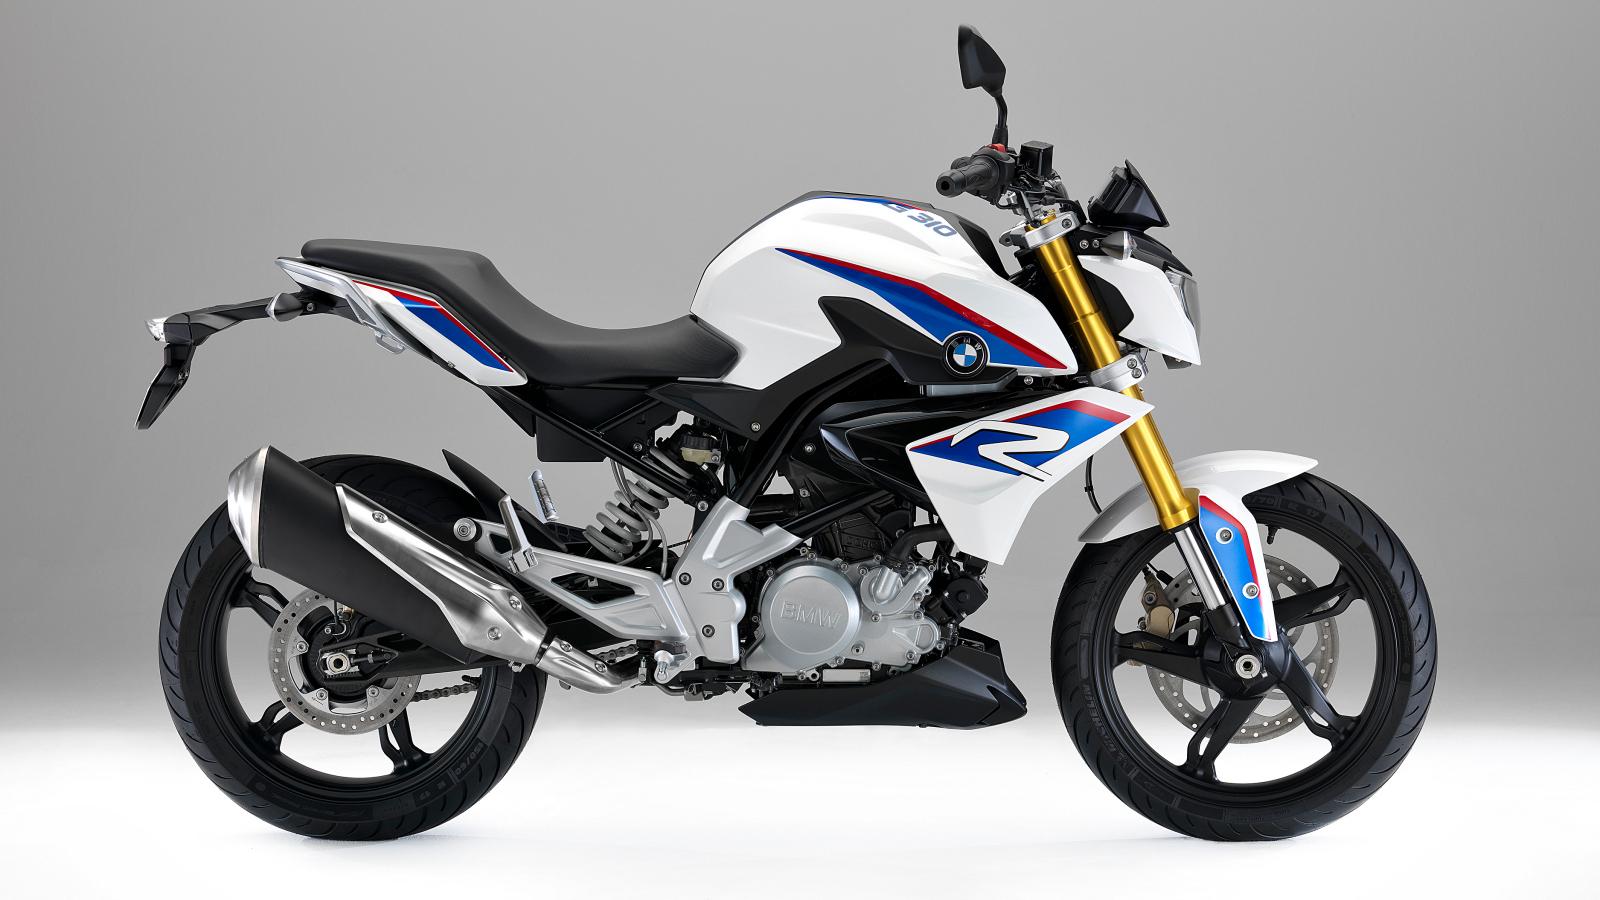 BMW G 310 R Picture, Photo, Wallpaper